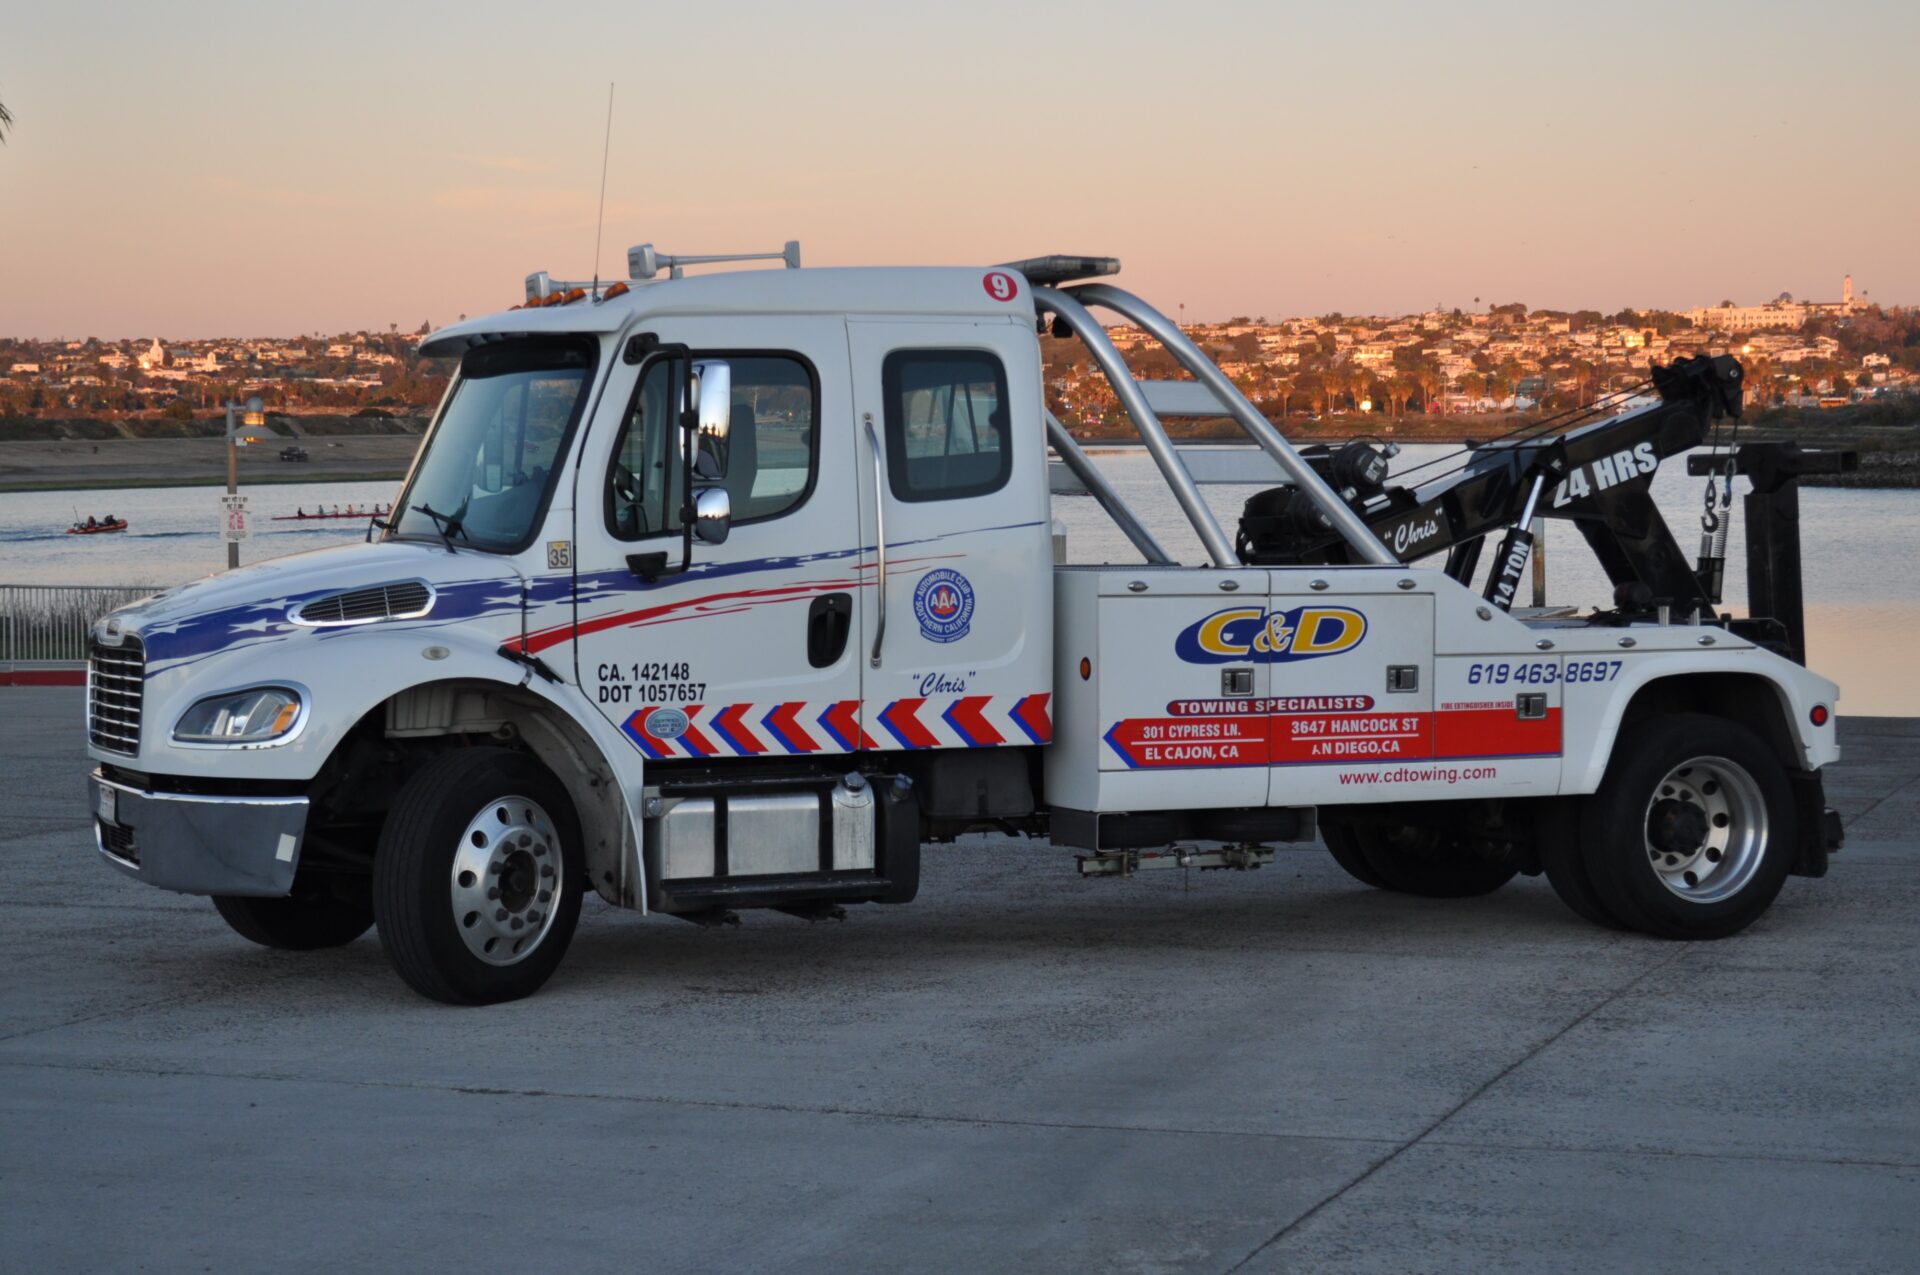 C & D Towing San Diego (760)518-0101